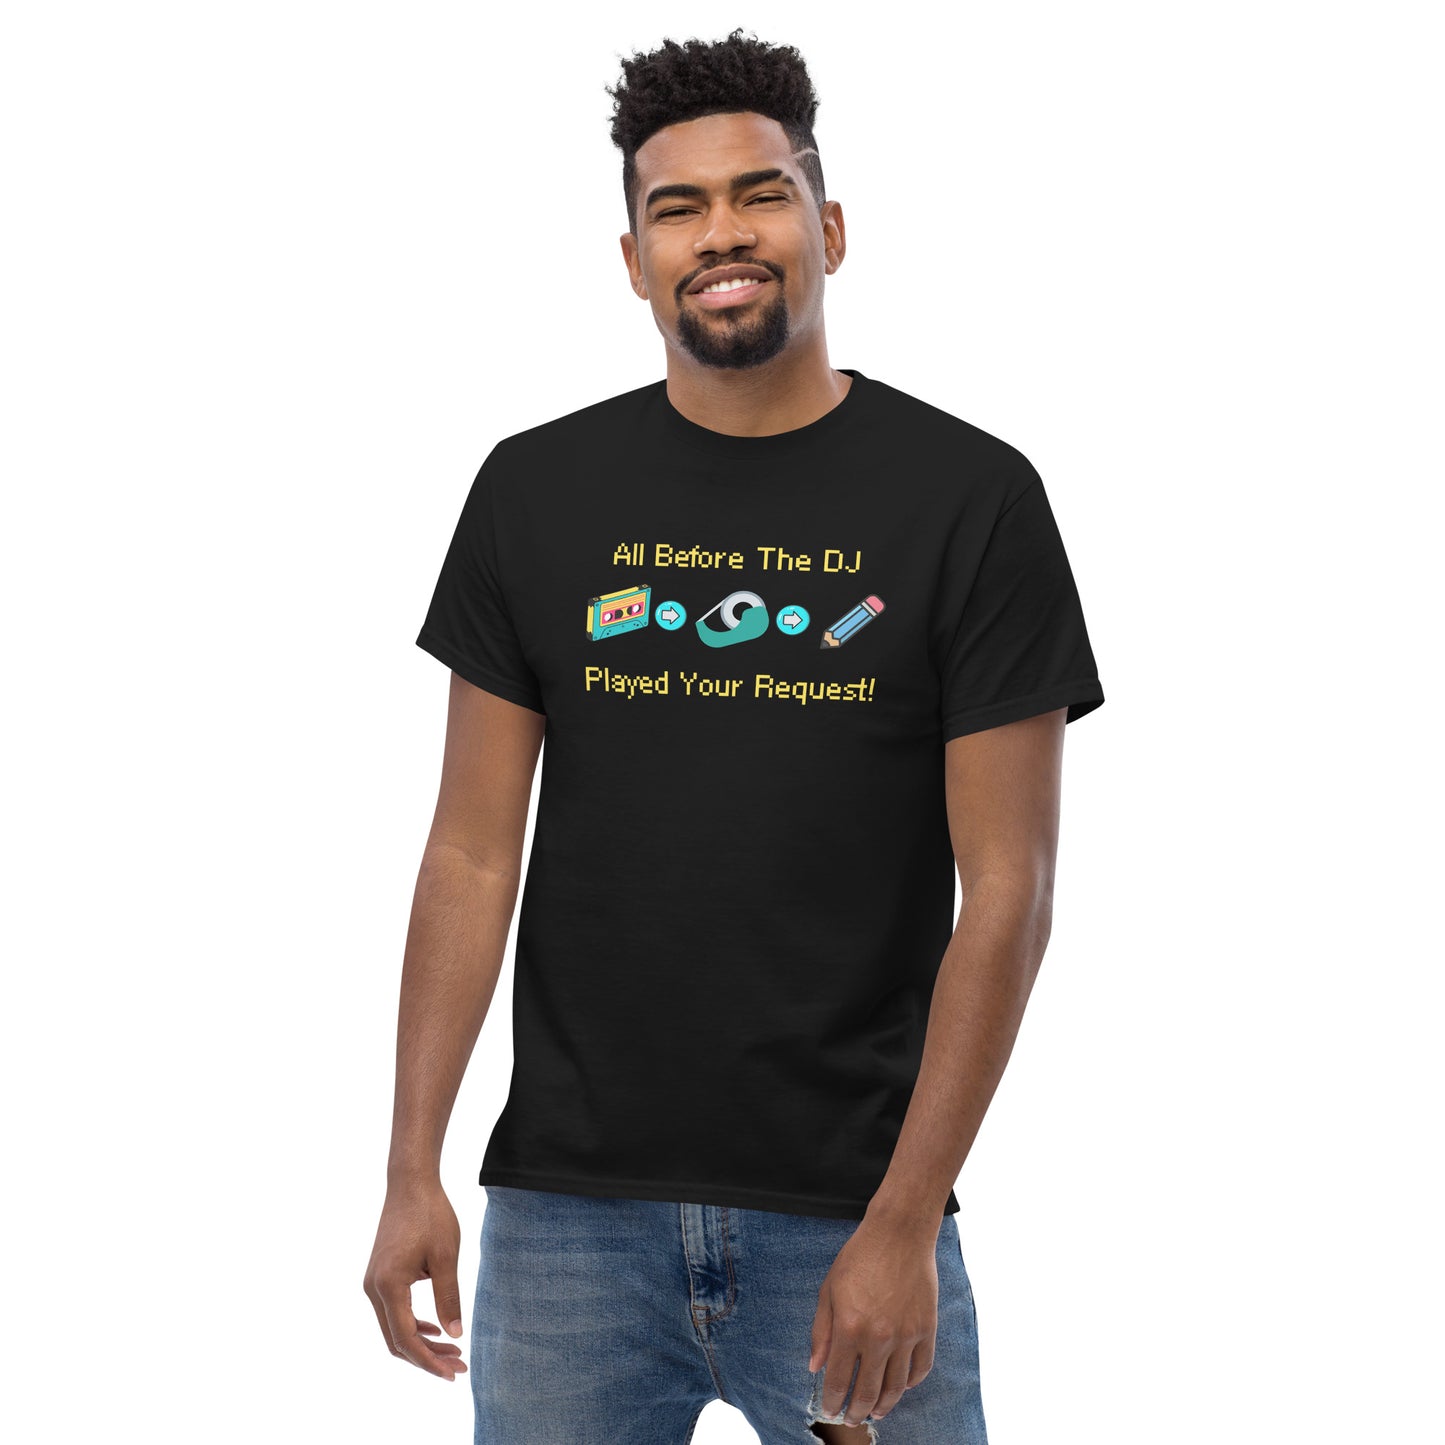 All Before The DJ Played Your Request! Men's classic tee